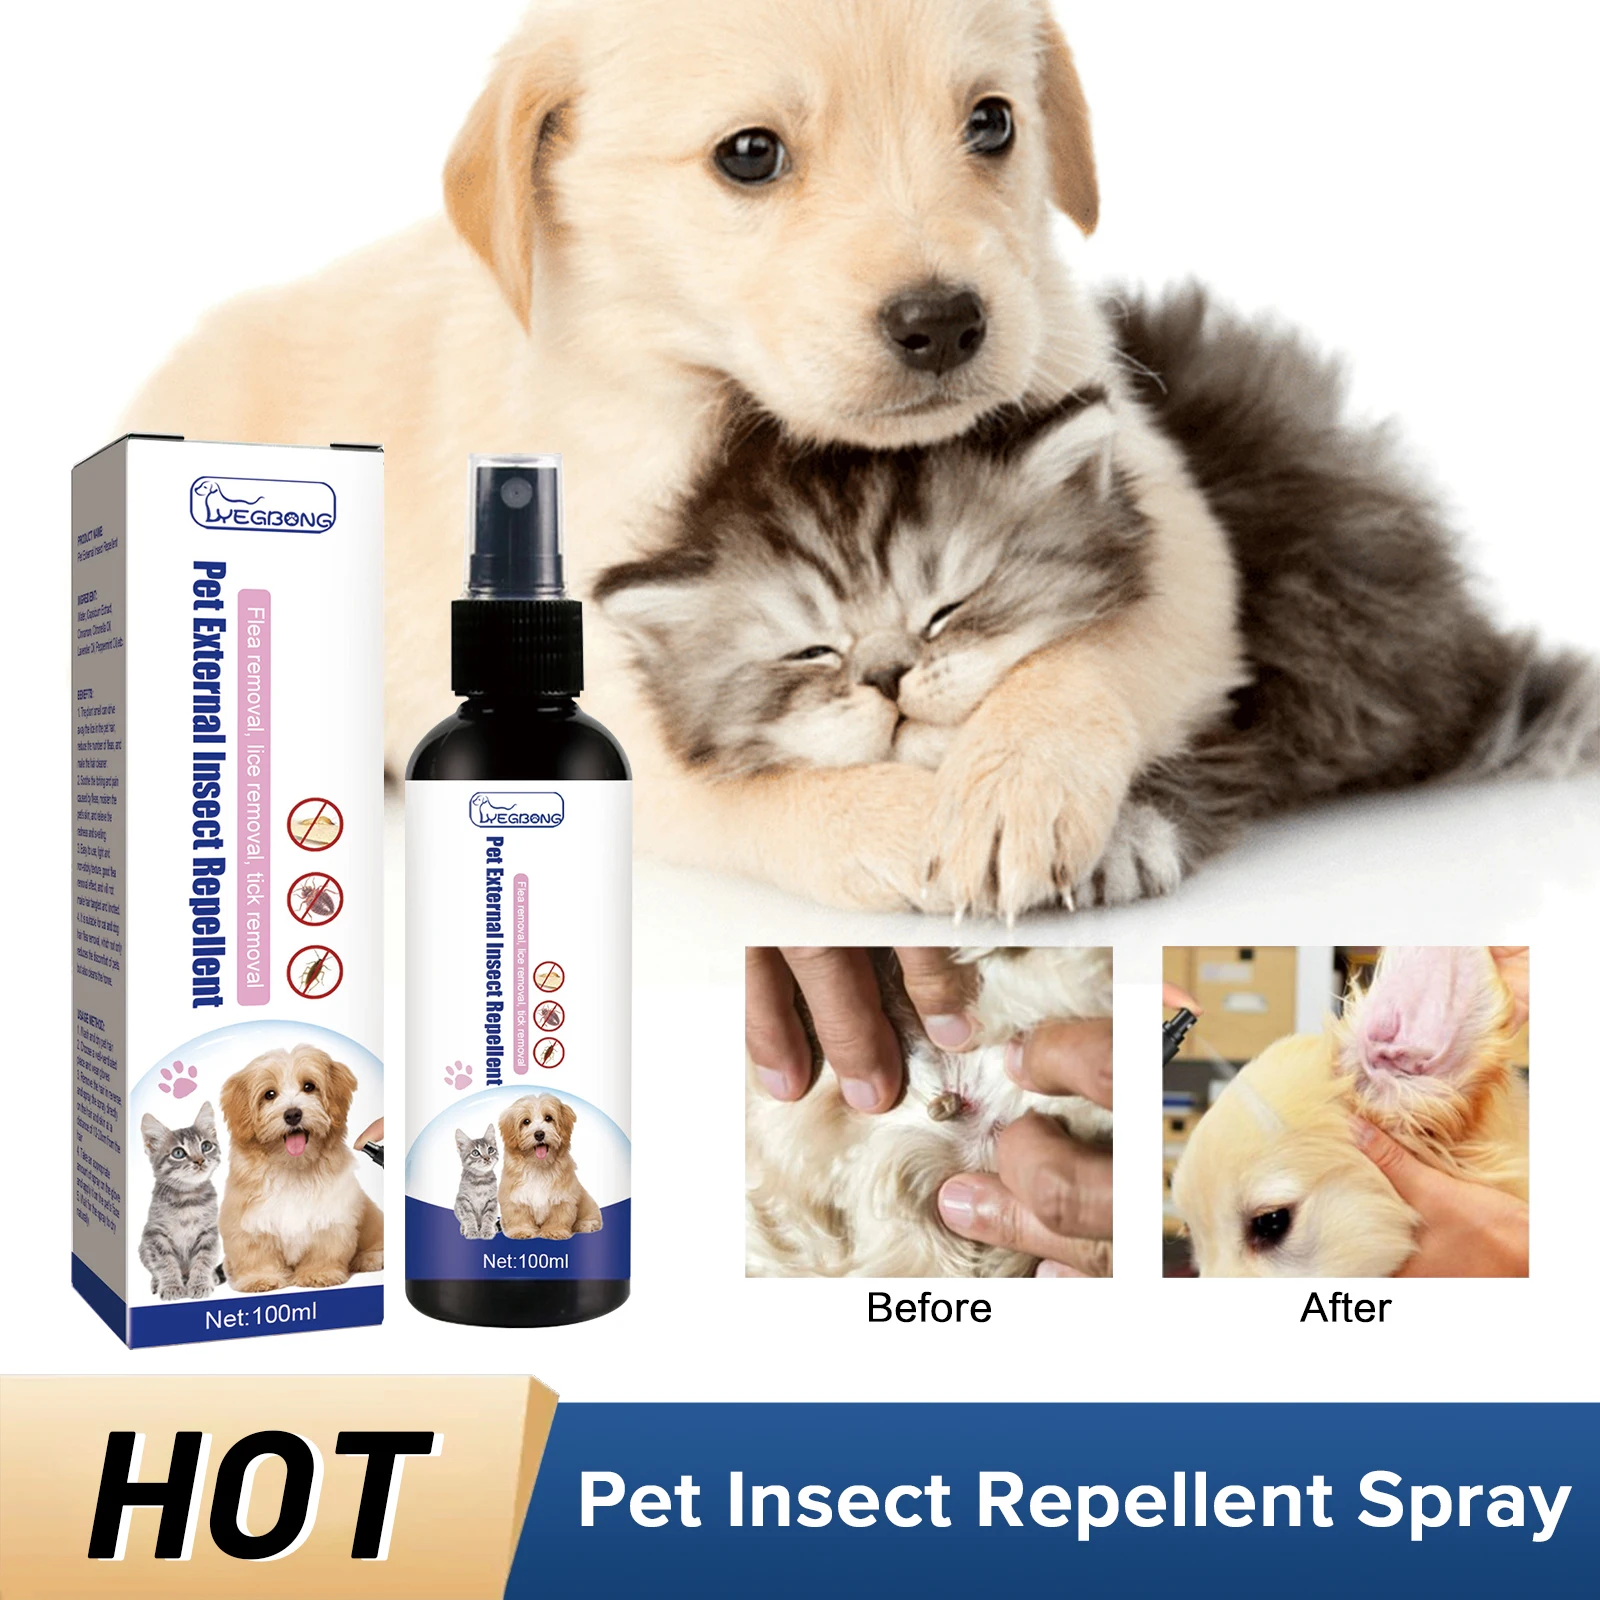 

Pet Insect Repellent Spray Flea Lice Remover Cat Body Anti Itching Puppy Kitten Skin Cleaning Control Repel Dog Tick Flea Killer